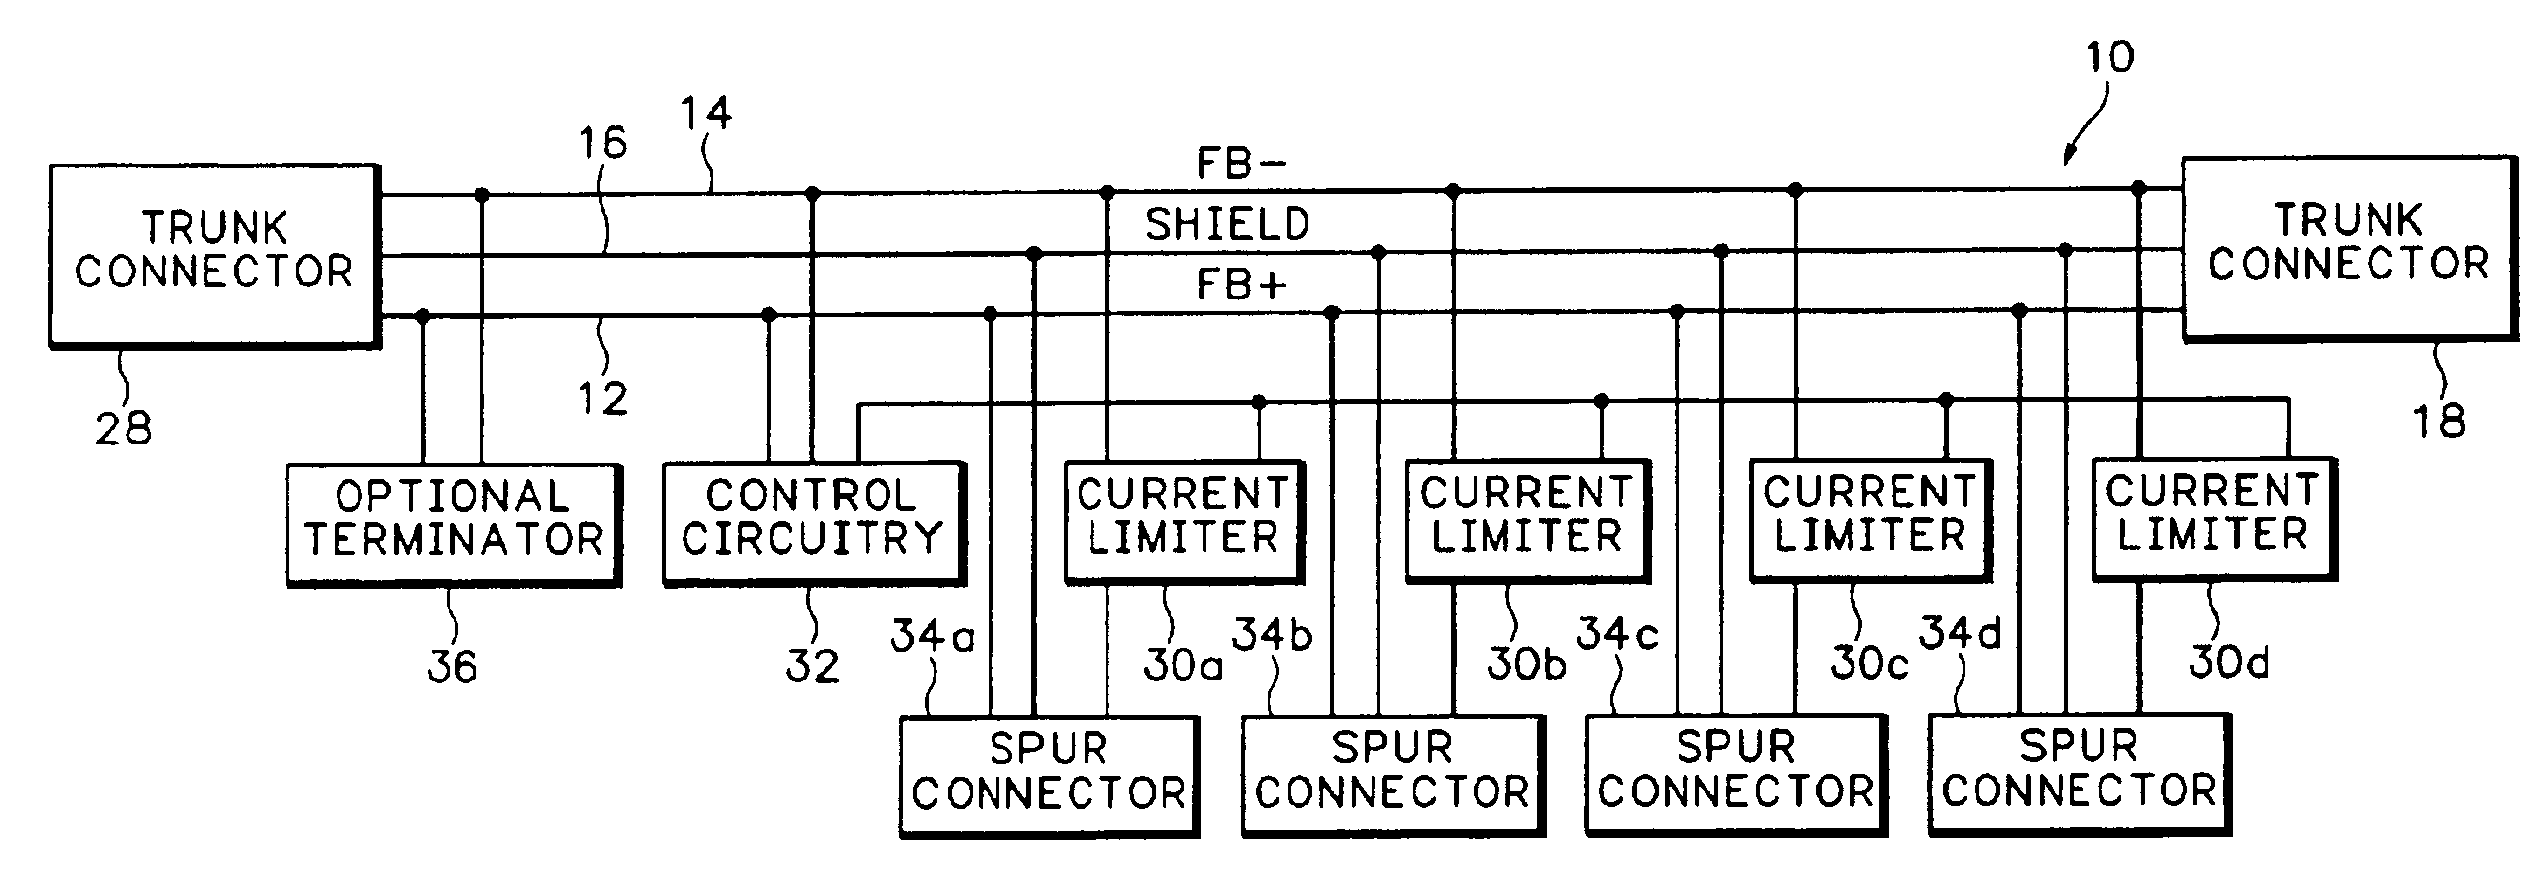 Enhanced spur cable circuit protection device and method for its implementation